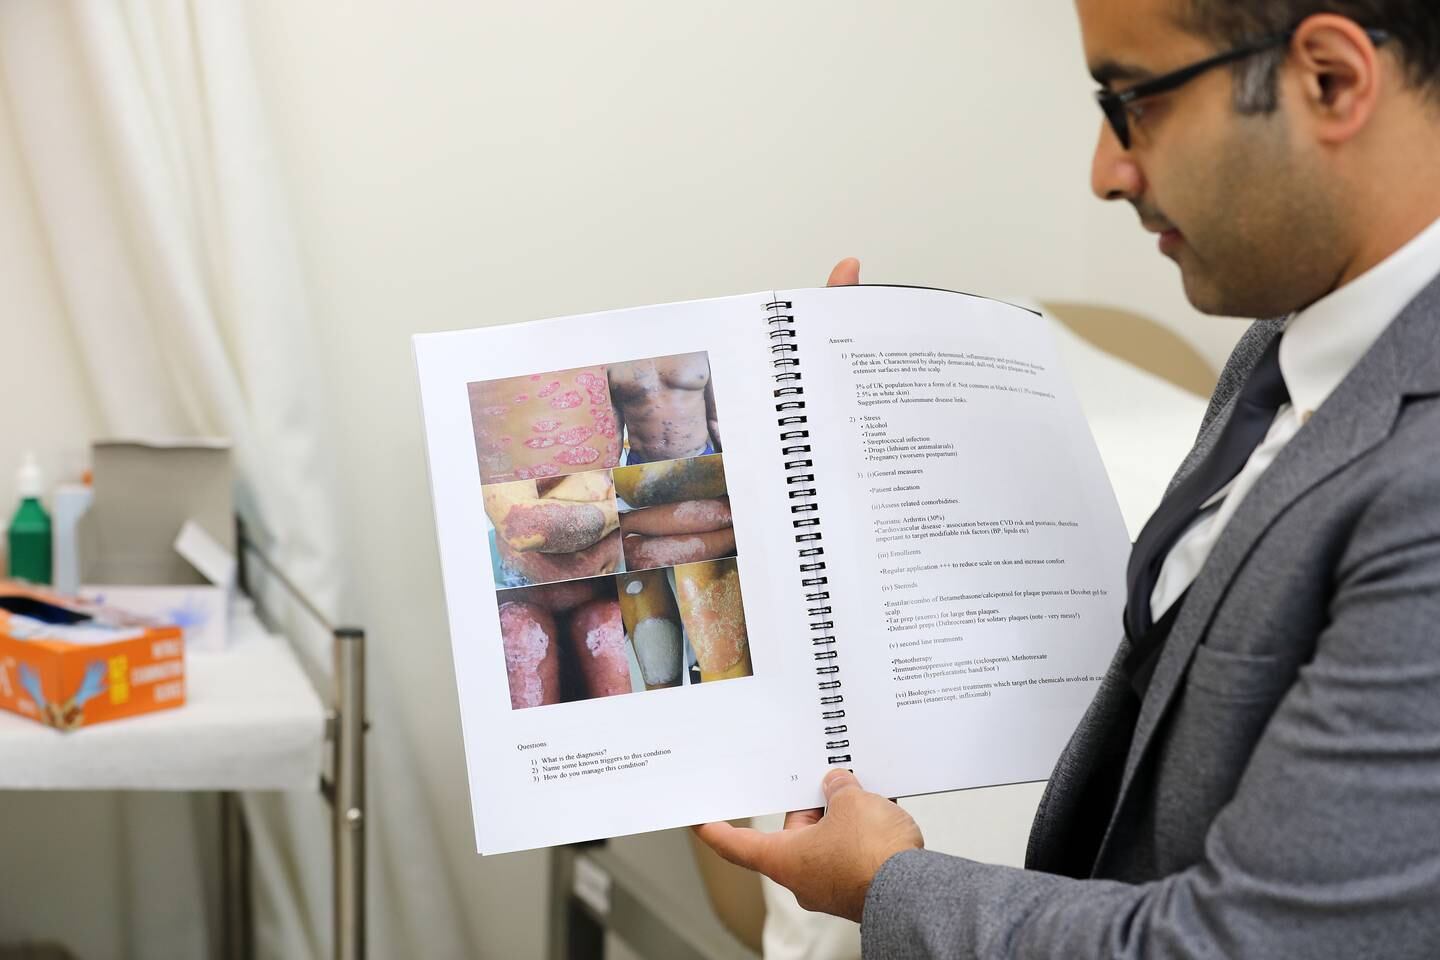 Dr Haider Ali spent a year creating his own guide, featuring 35 cases, with pictures of how they look side by side in white and darker skin, alongside a description of how to manage the condition. Chris Whiteoak / The National